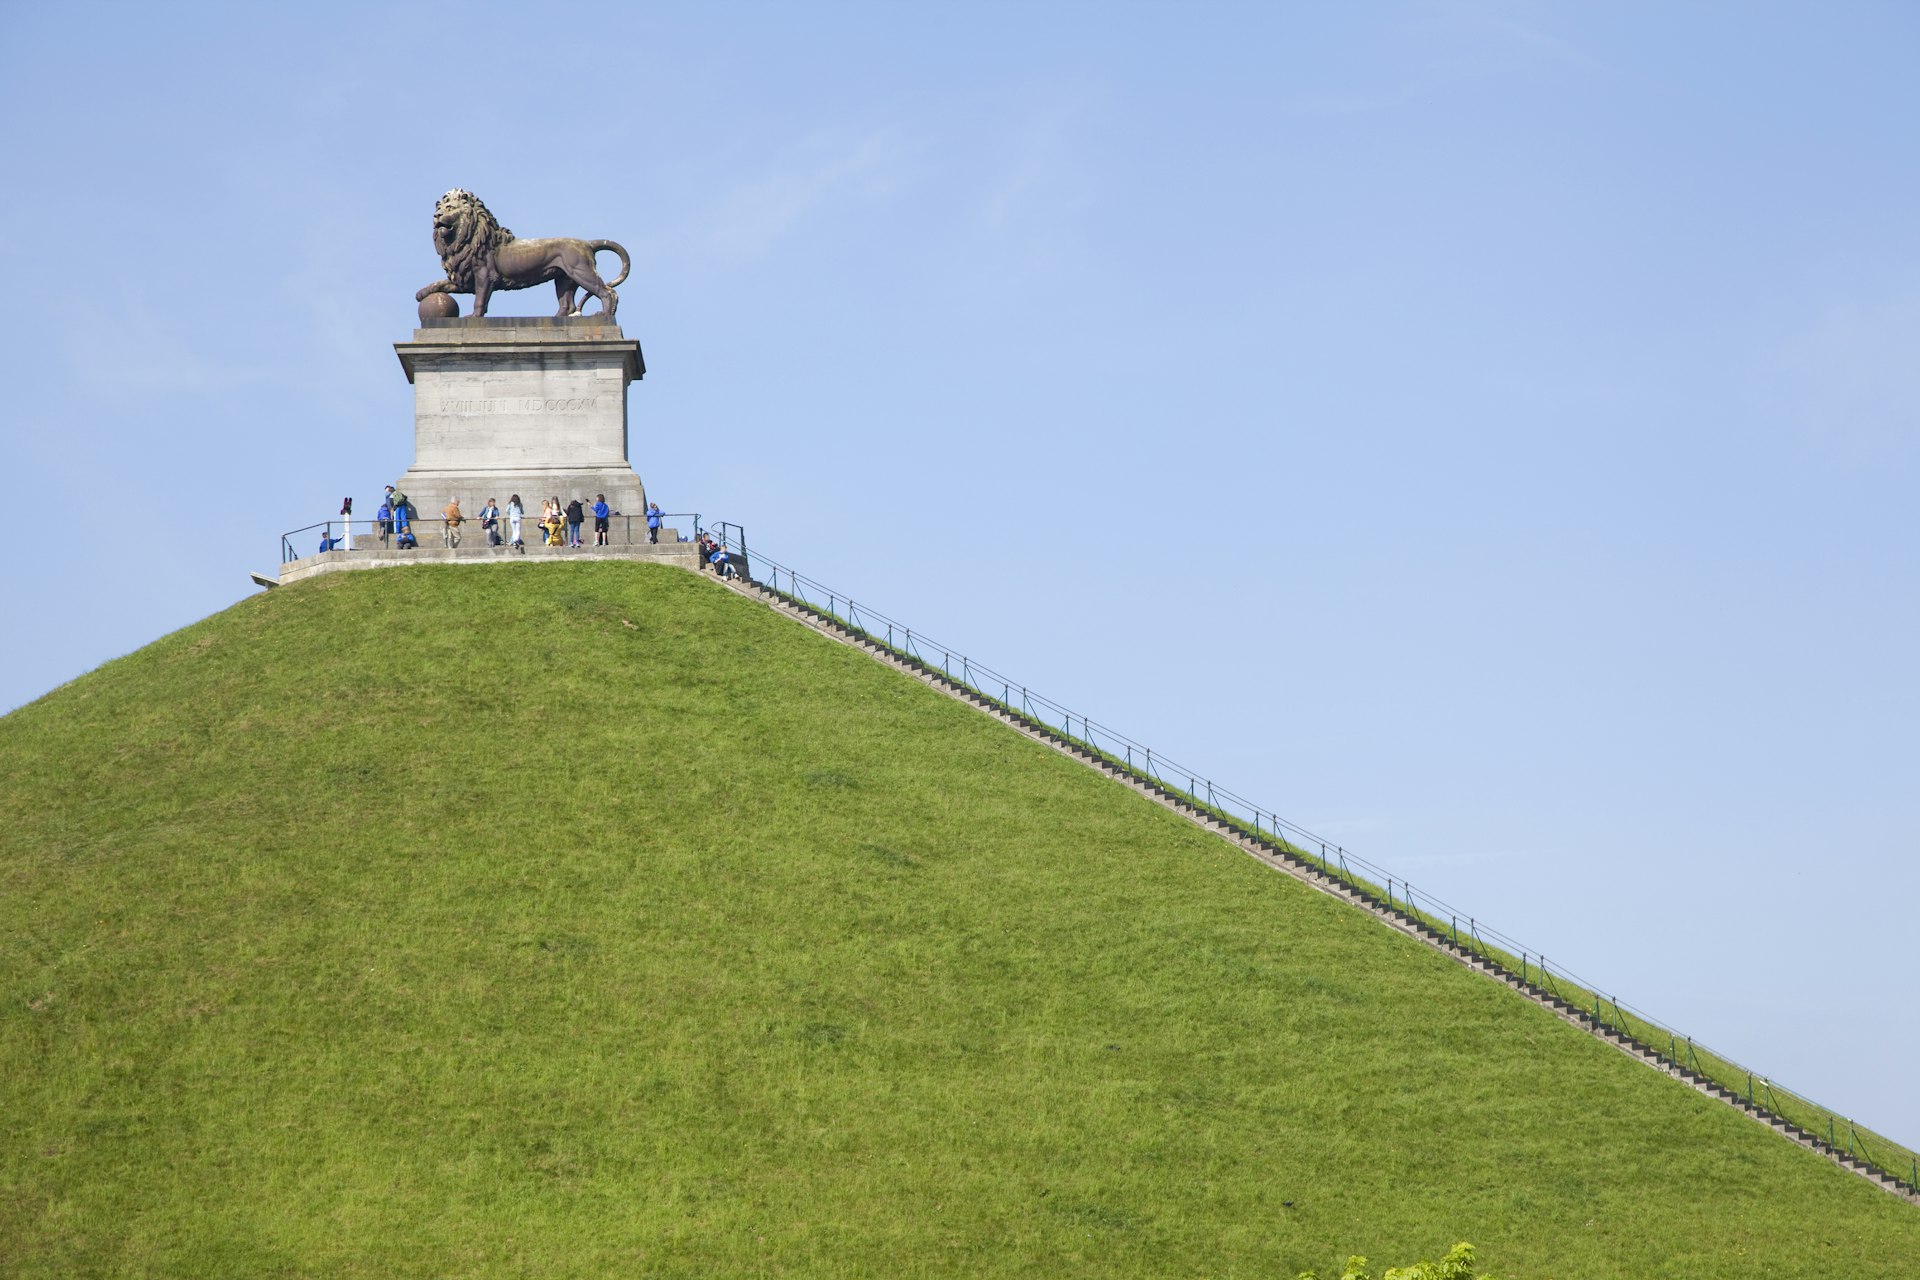 A large grass-covered mound with a huge lion statue at the top. People are milling around the base of the statue